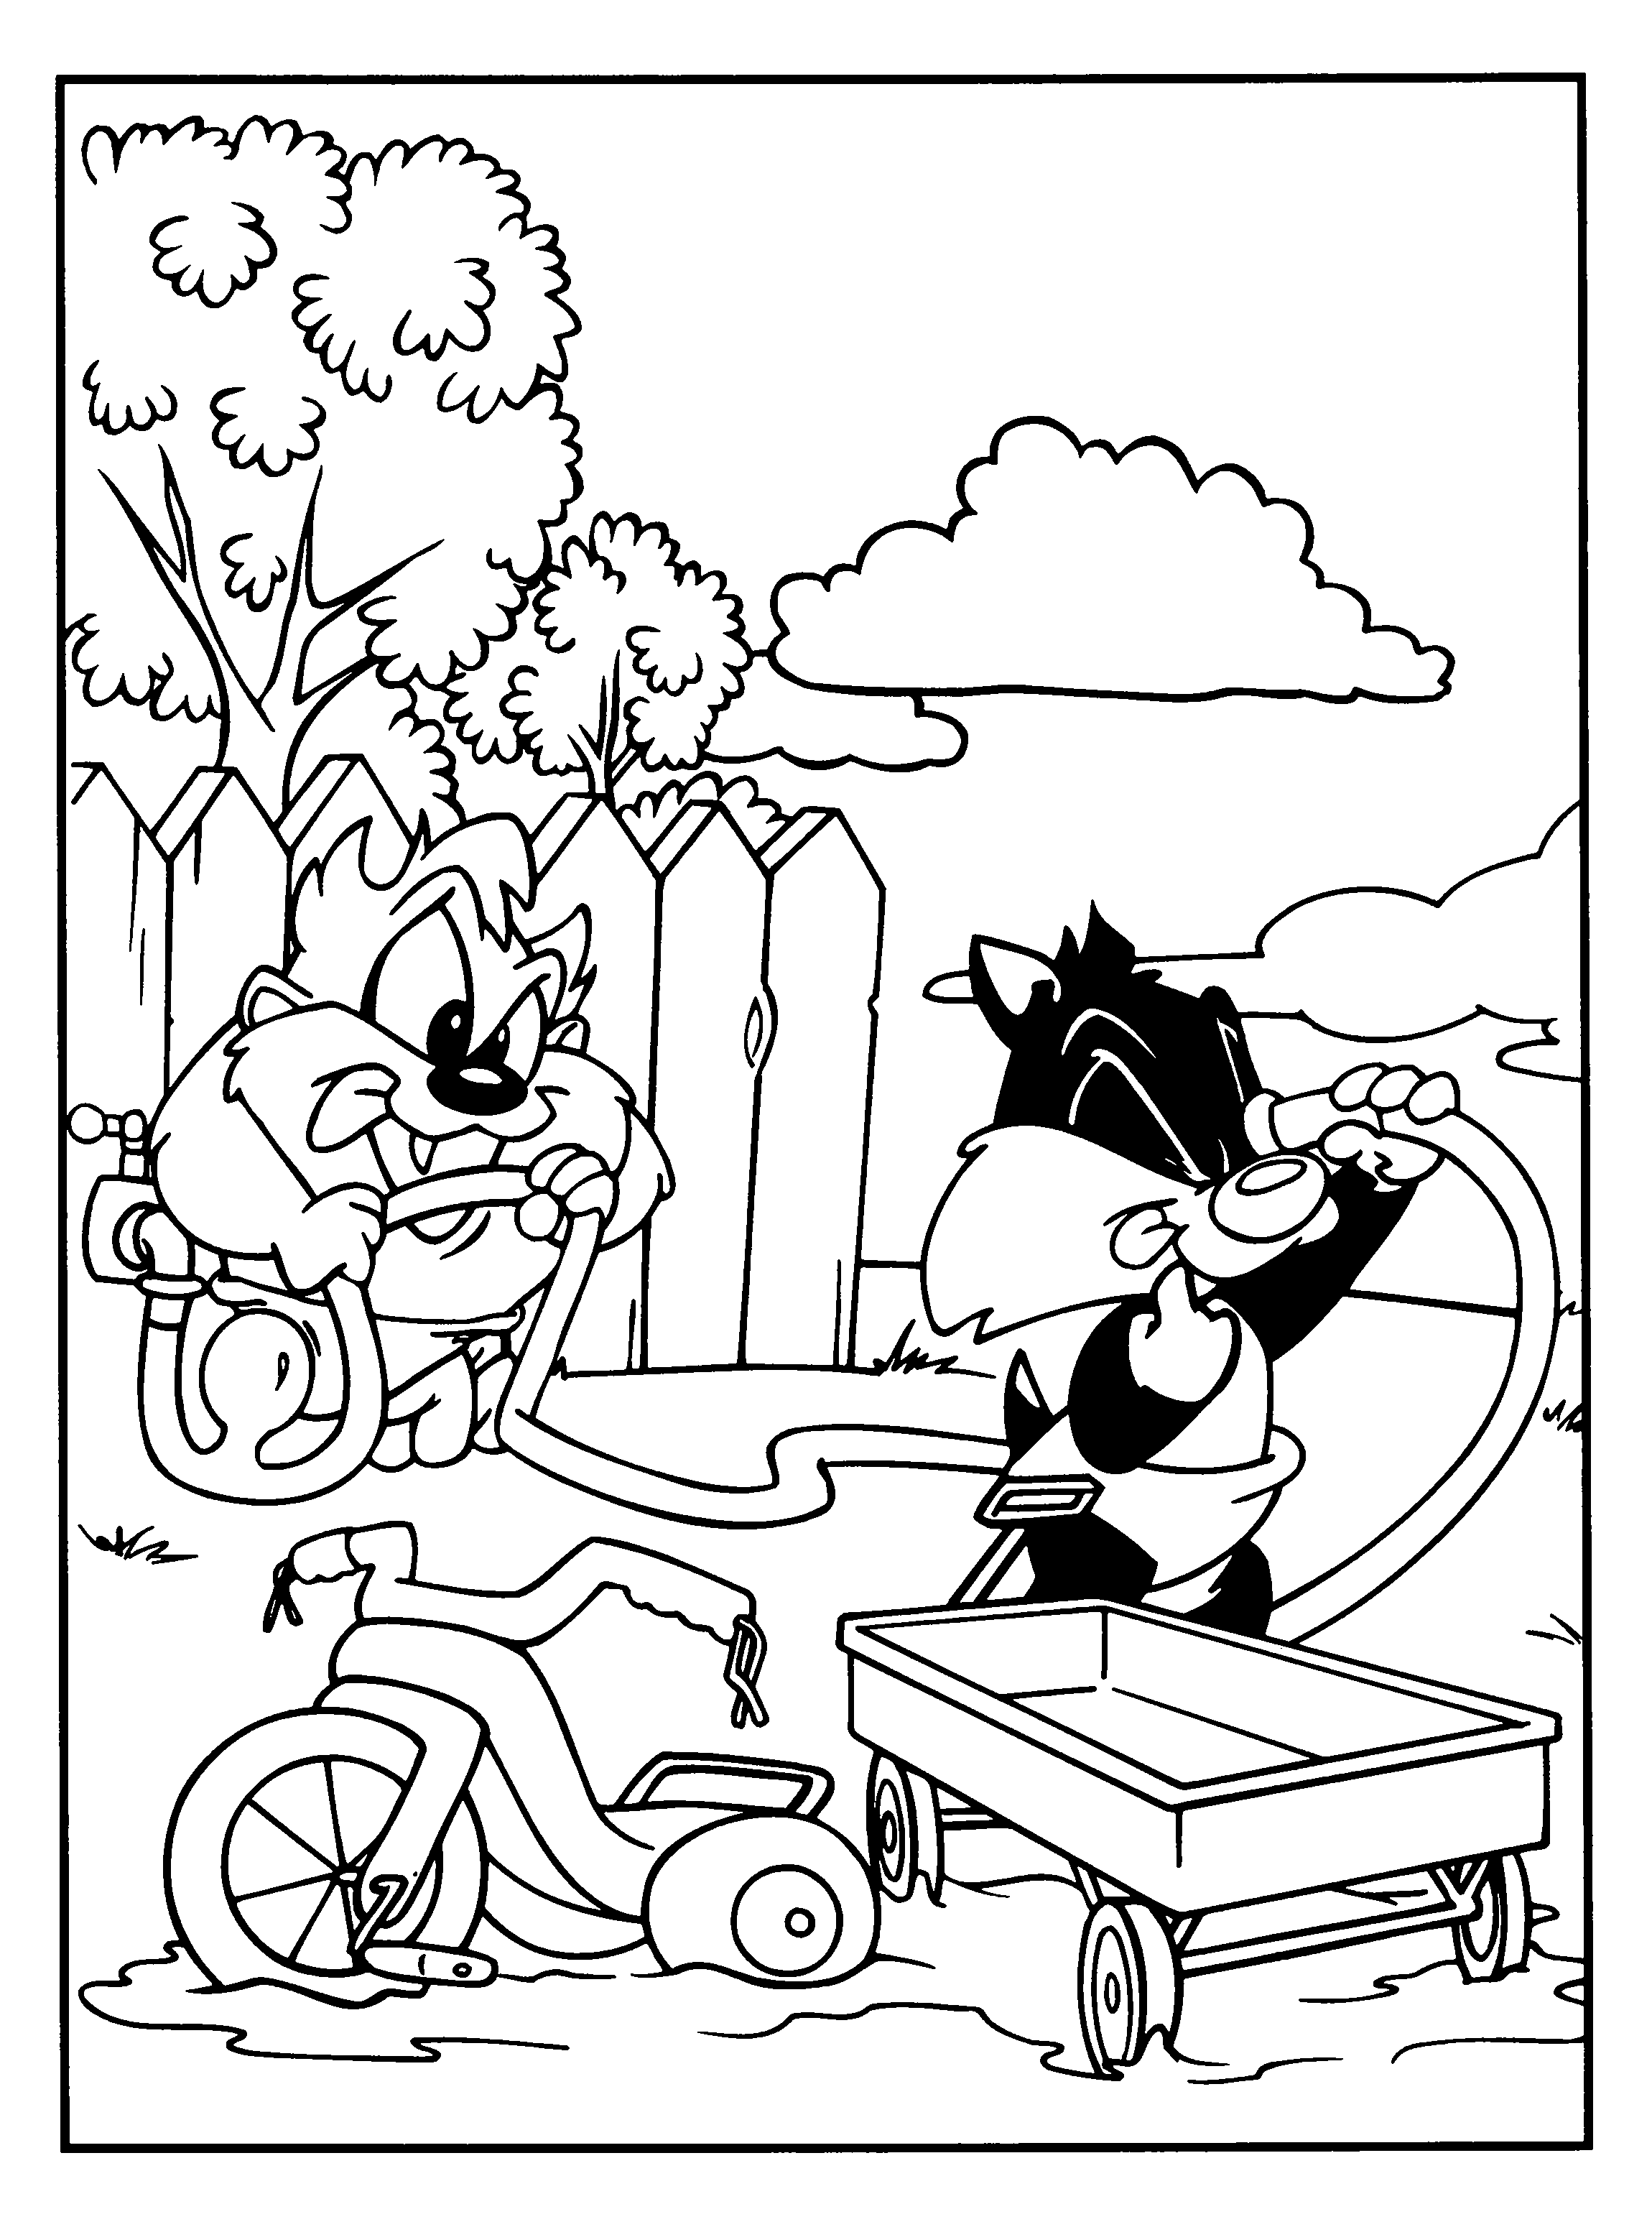 Baby looney tunes Coloring Pages - Coloringpages1001.com